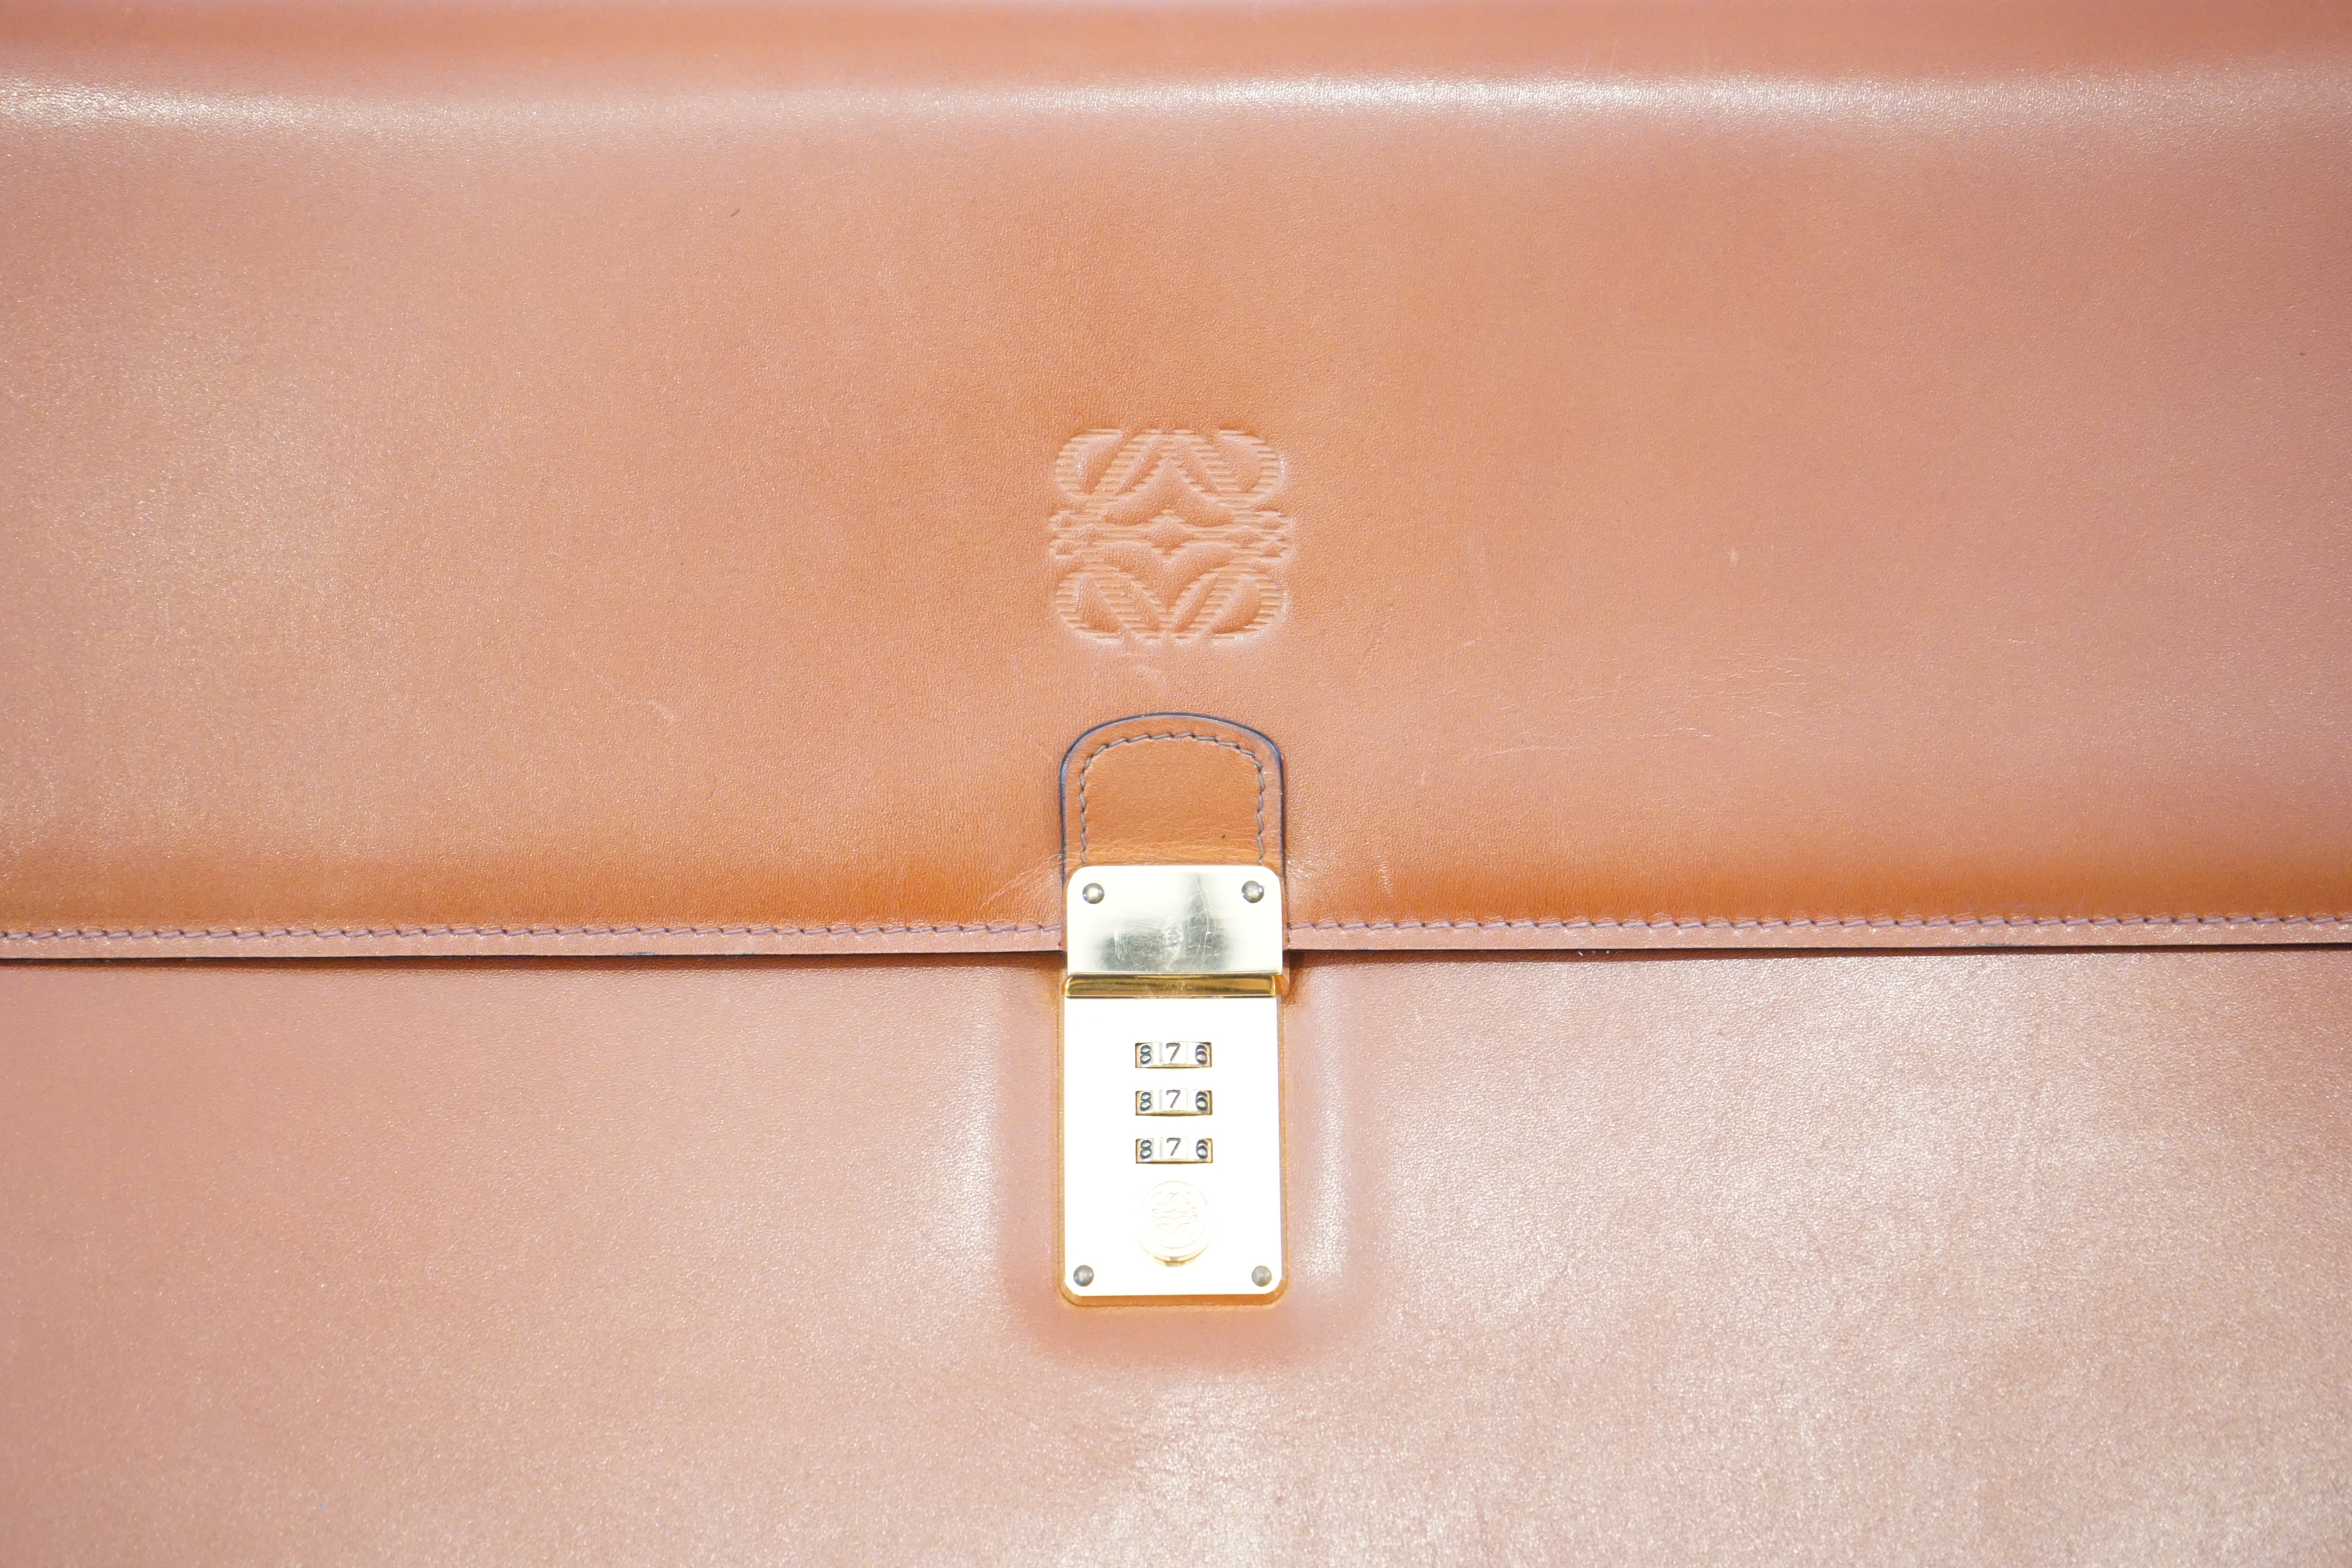 A gentlemen's Loewe brown tan leather briefcase with gold plated metalware, five division interior - Image 12 of 12